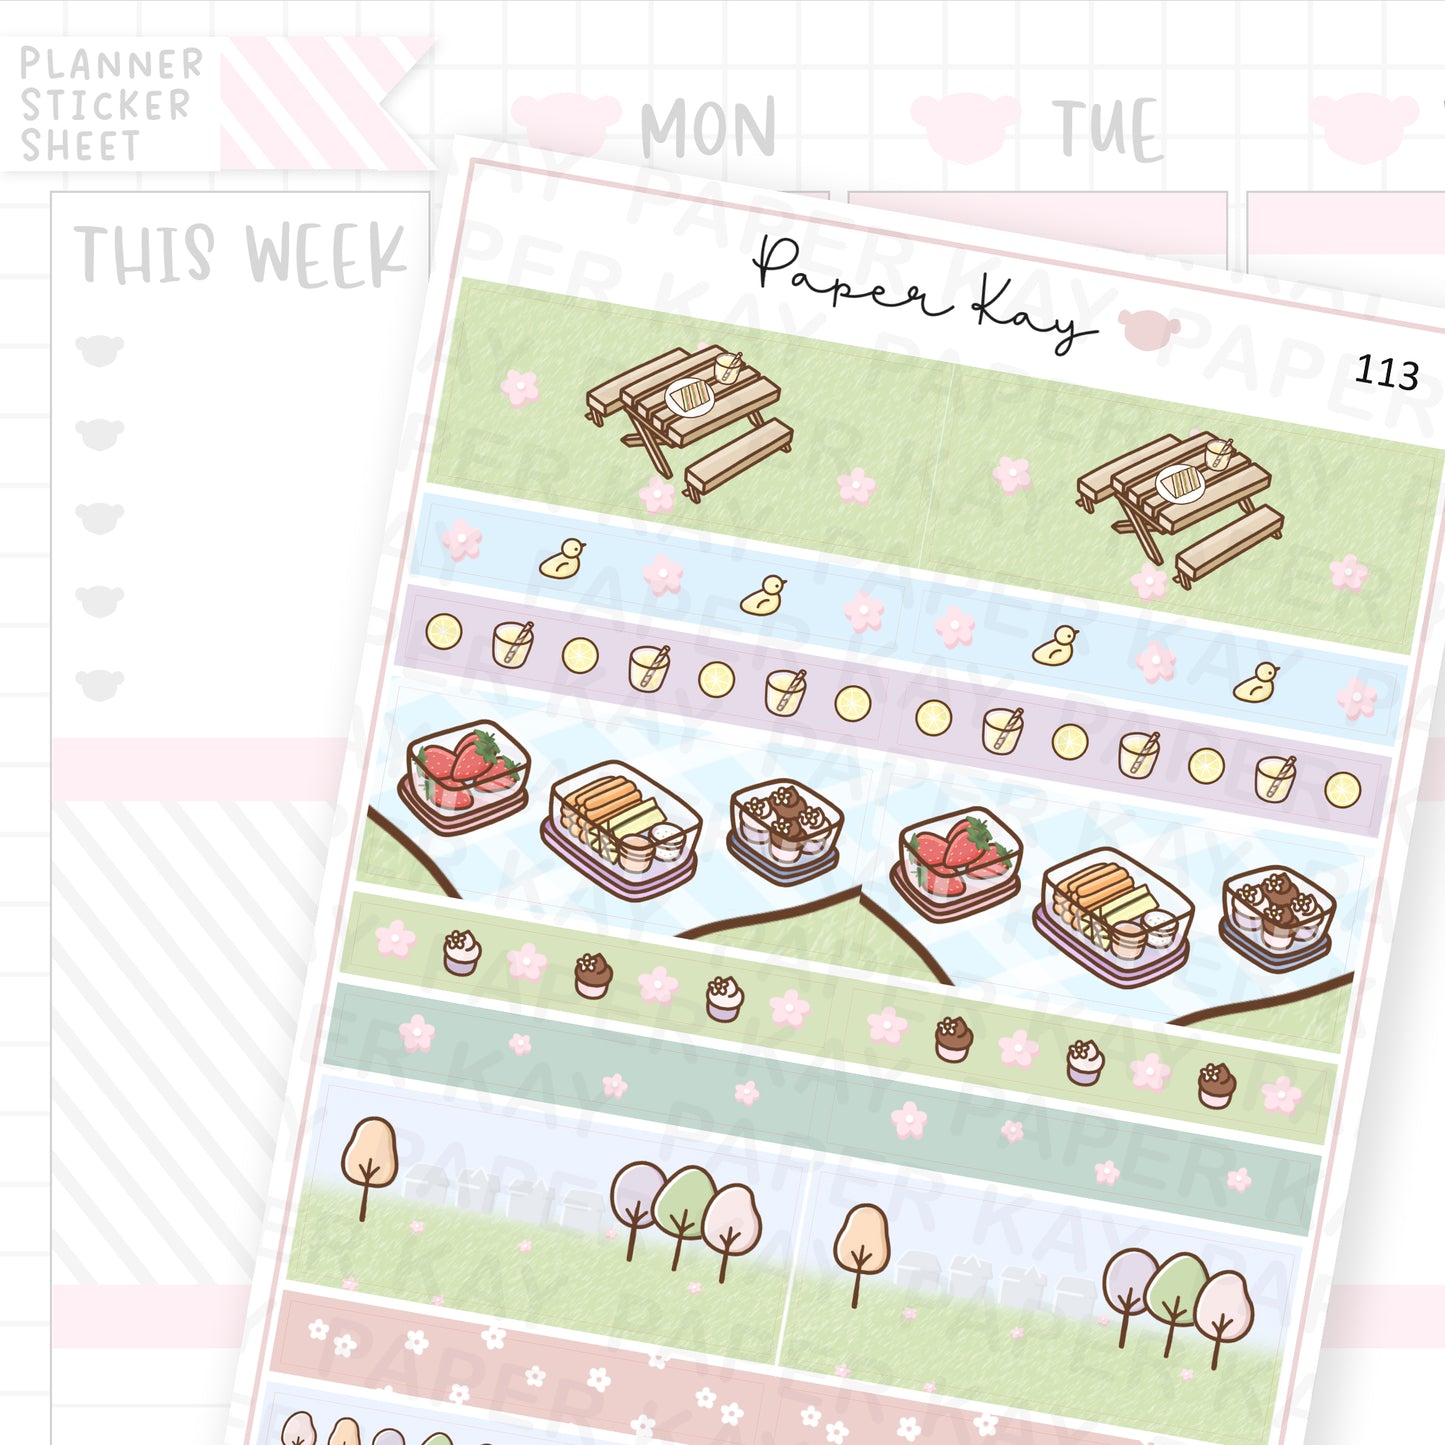 Picnic in the Park 1.5'' Wide Washi Strip Sticker Sheet